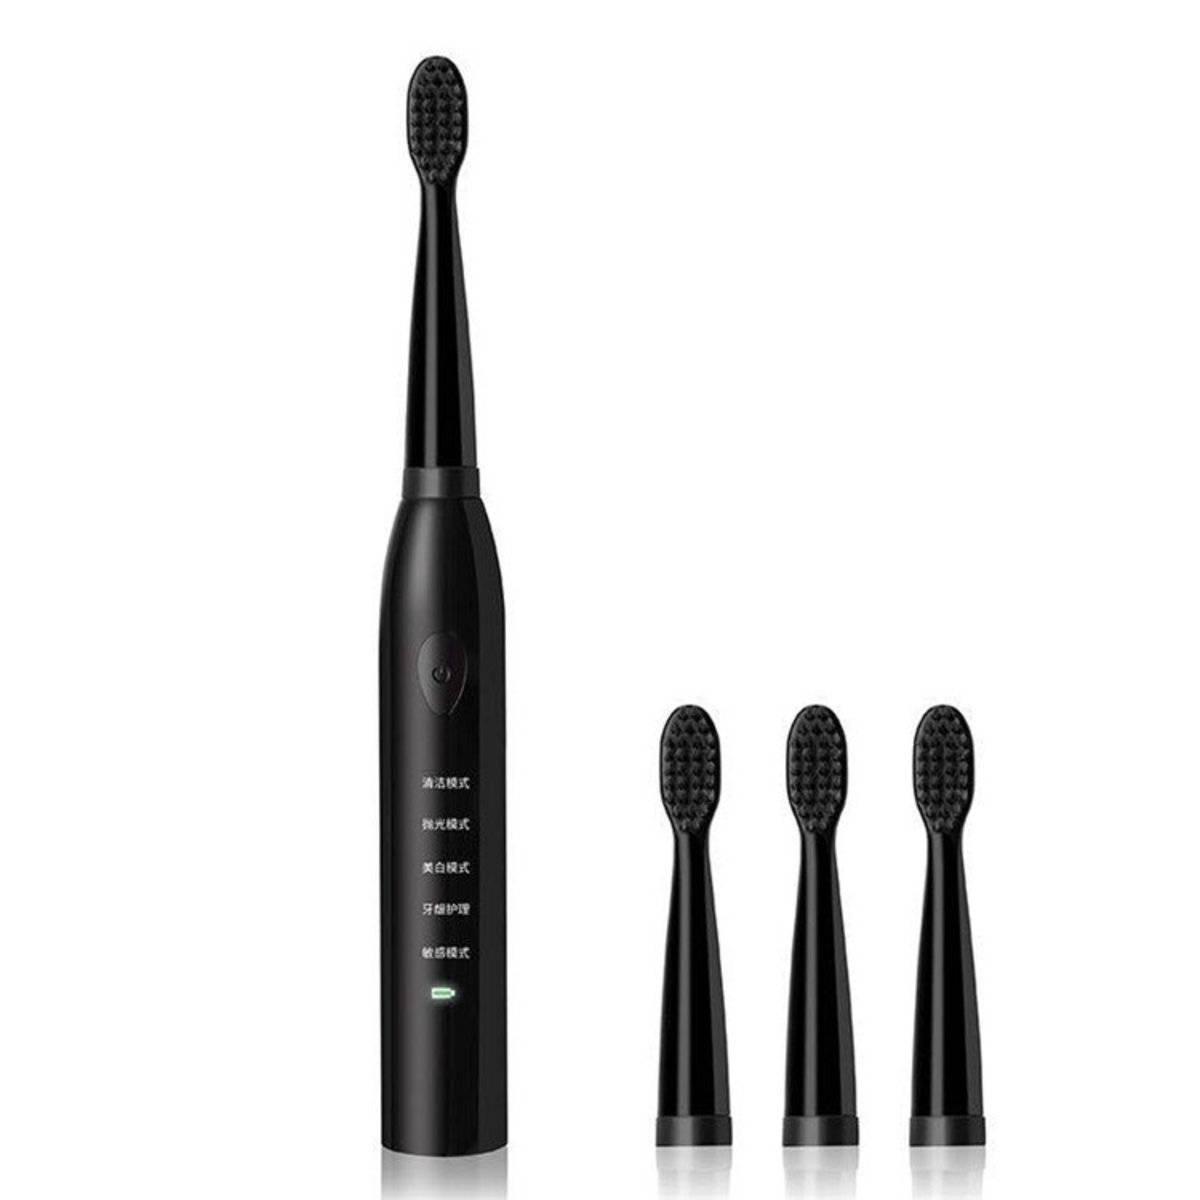 Ultrasonic five-speed electric toothbrush (black) with brush head x3